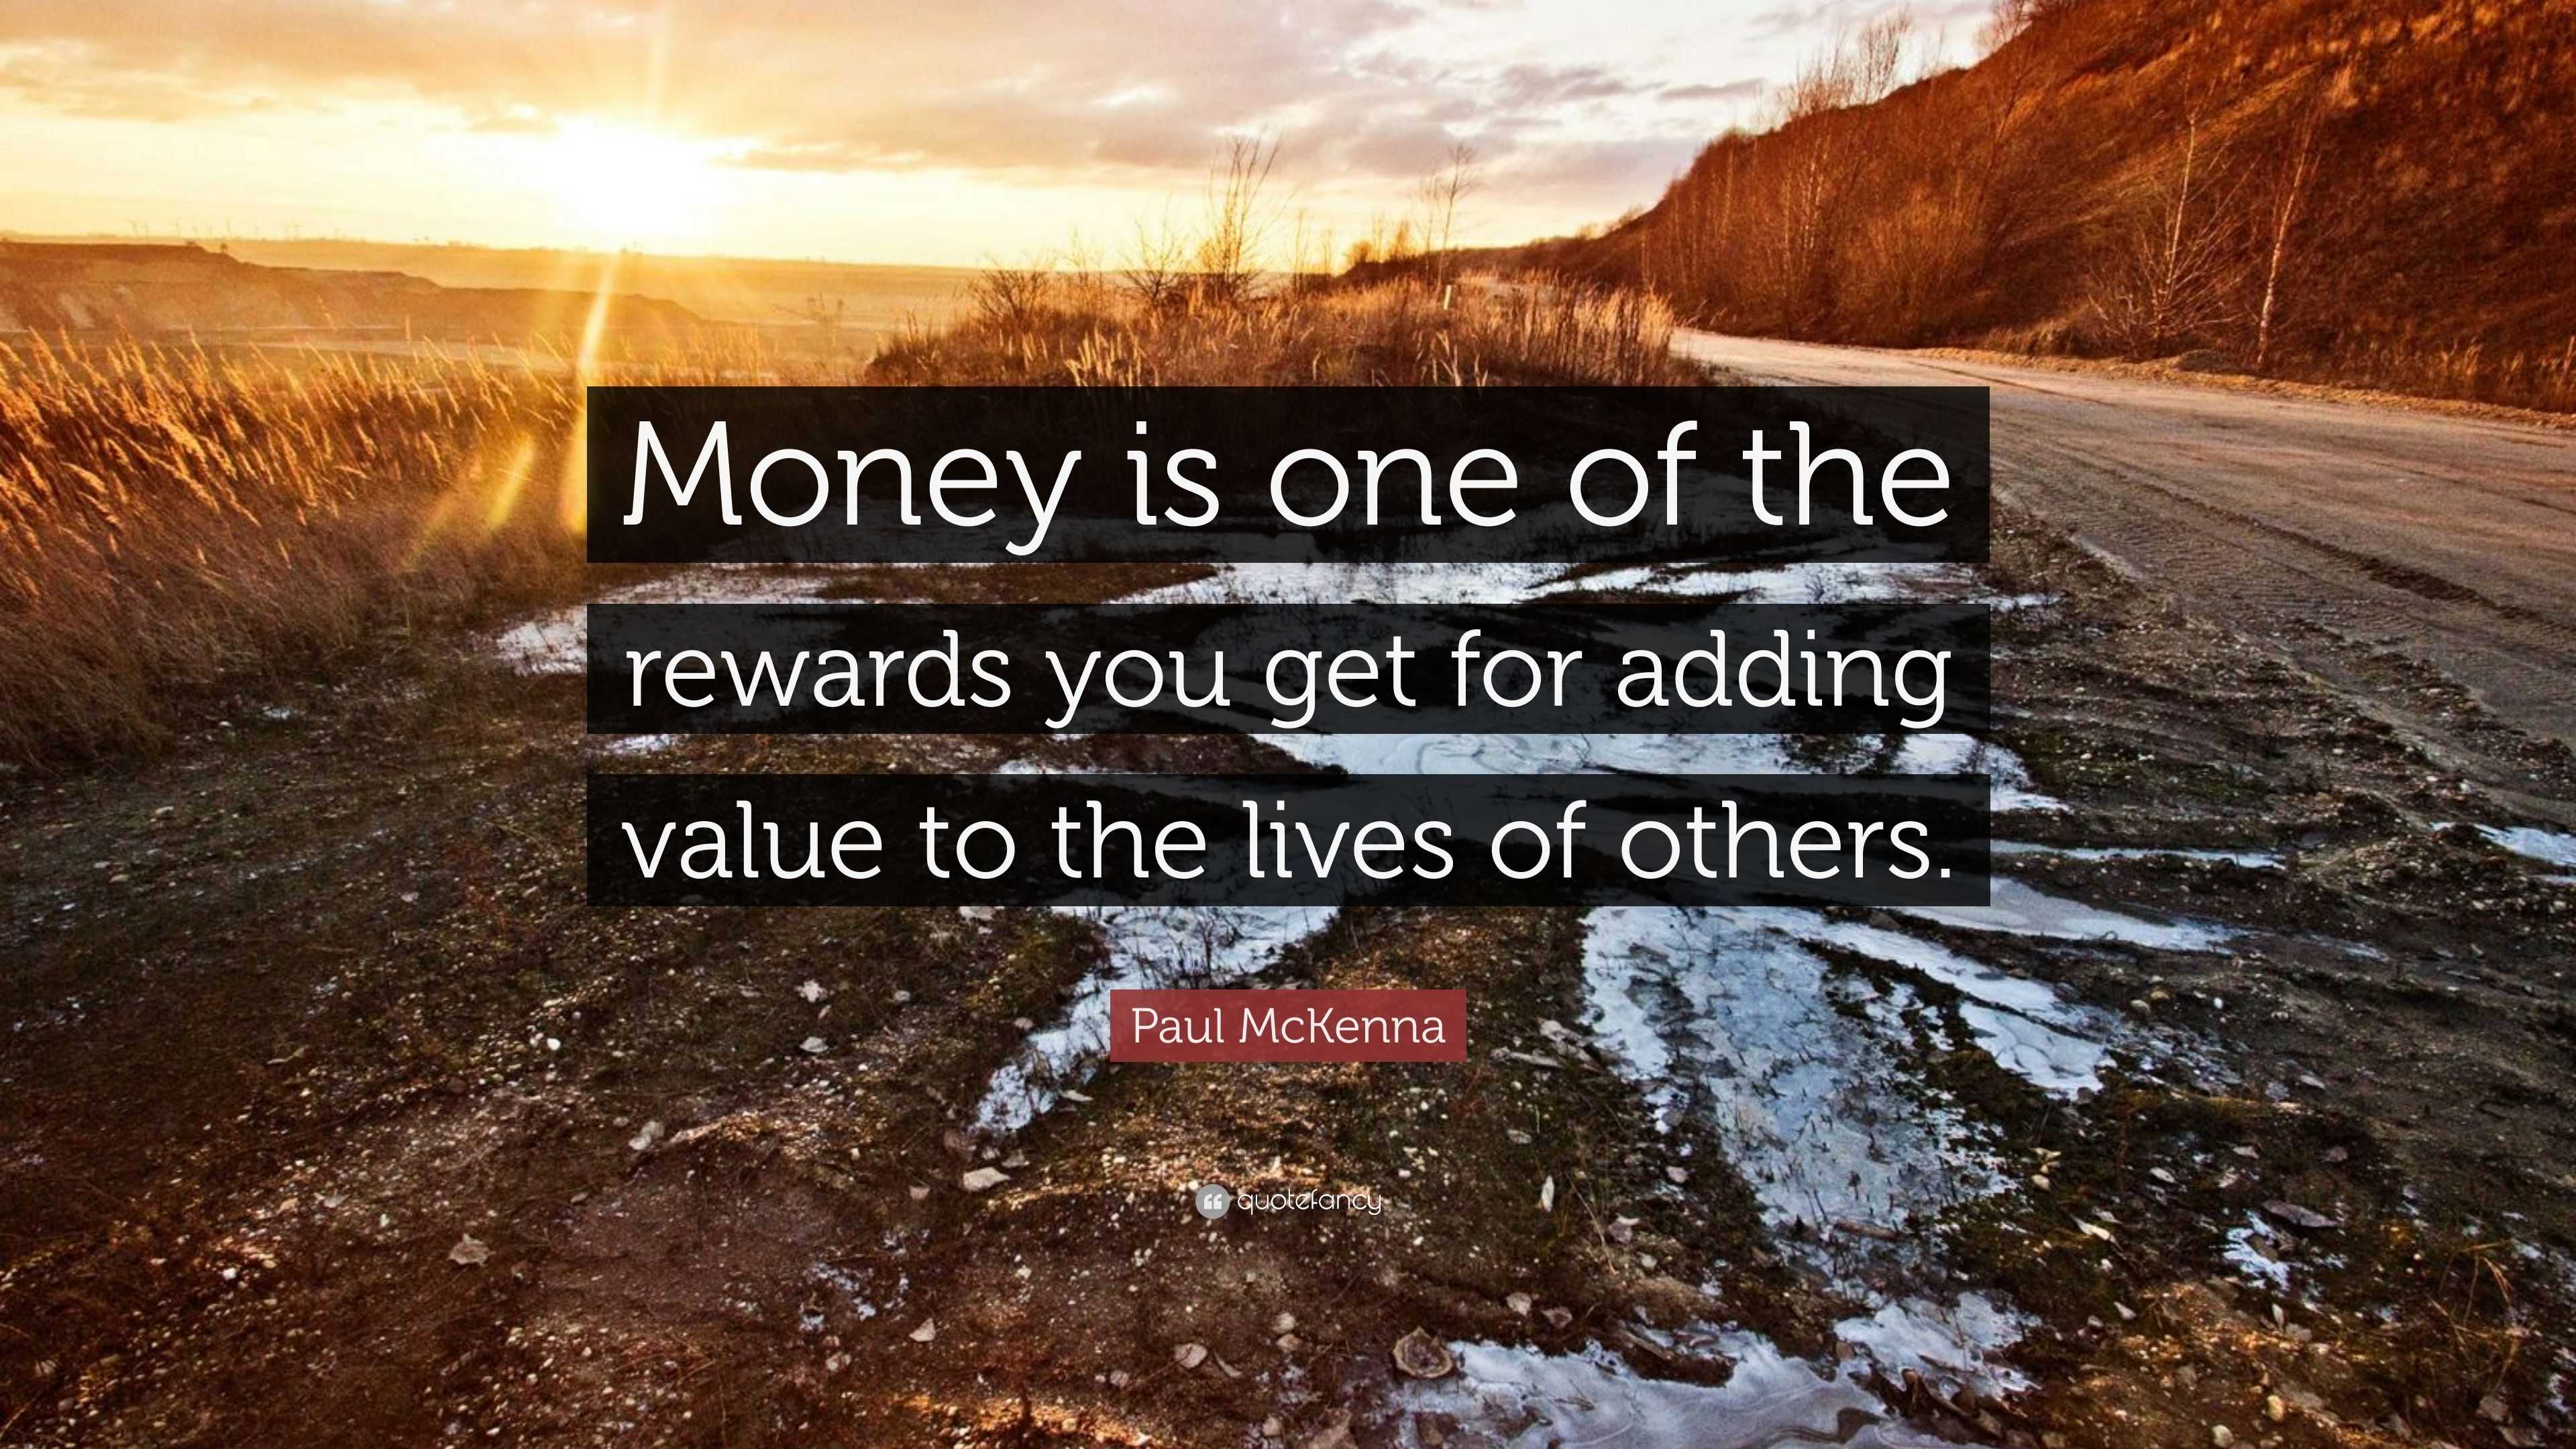 Paul McKenna Quote: “Money is one of the rewards you get for adding ...